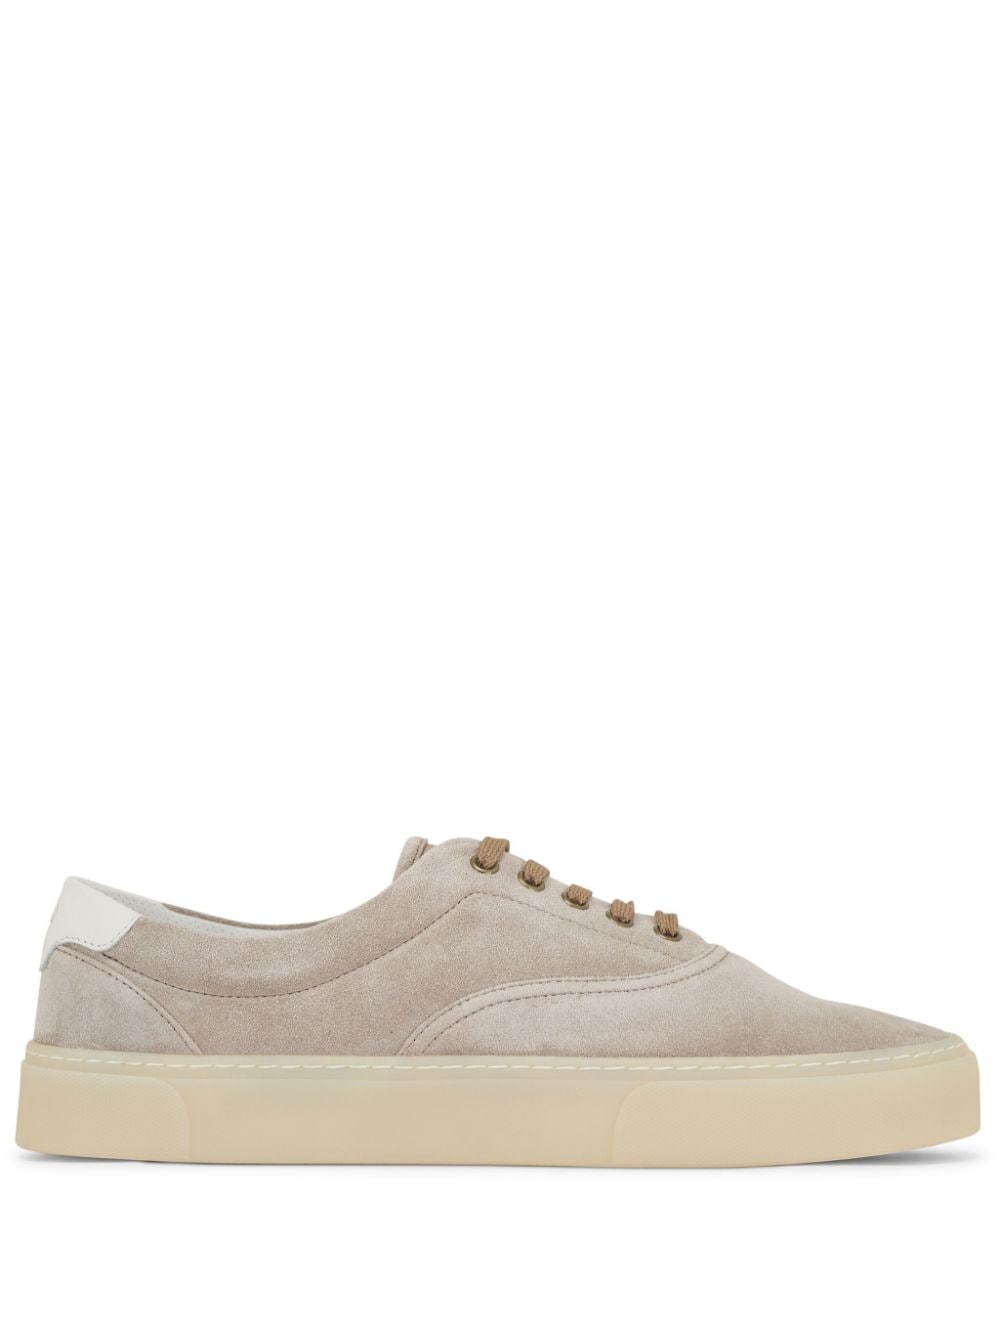 Cavalry suede sneakers